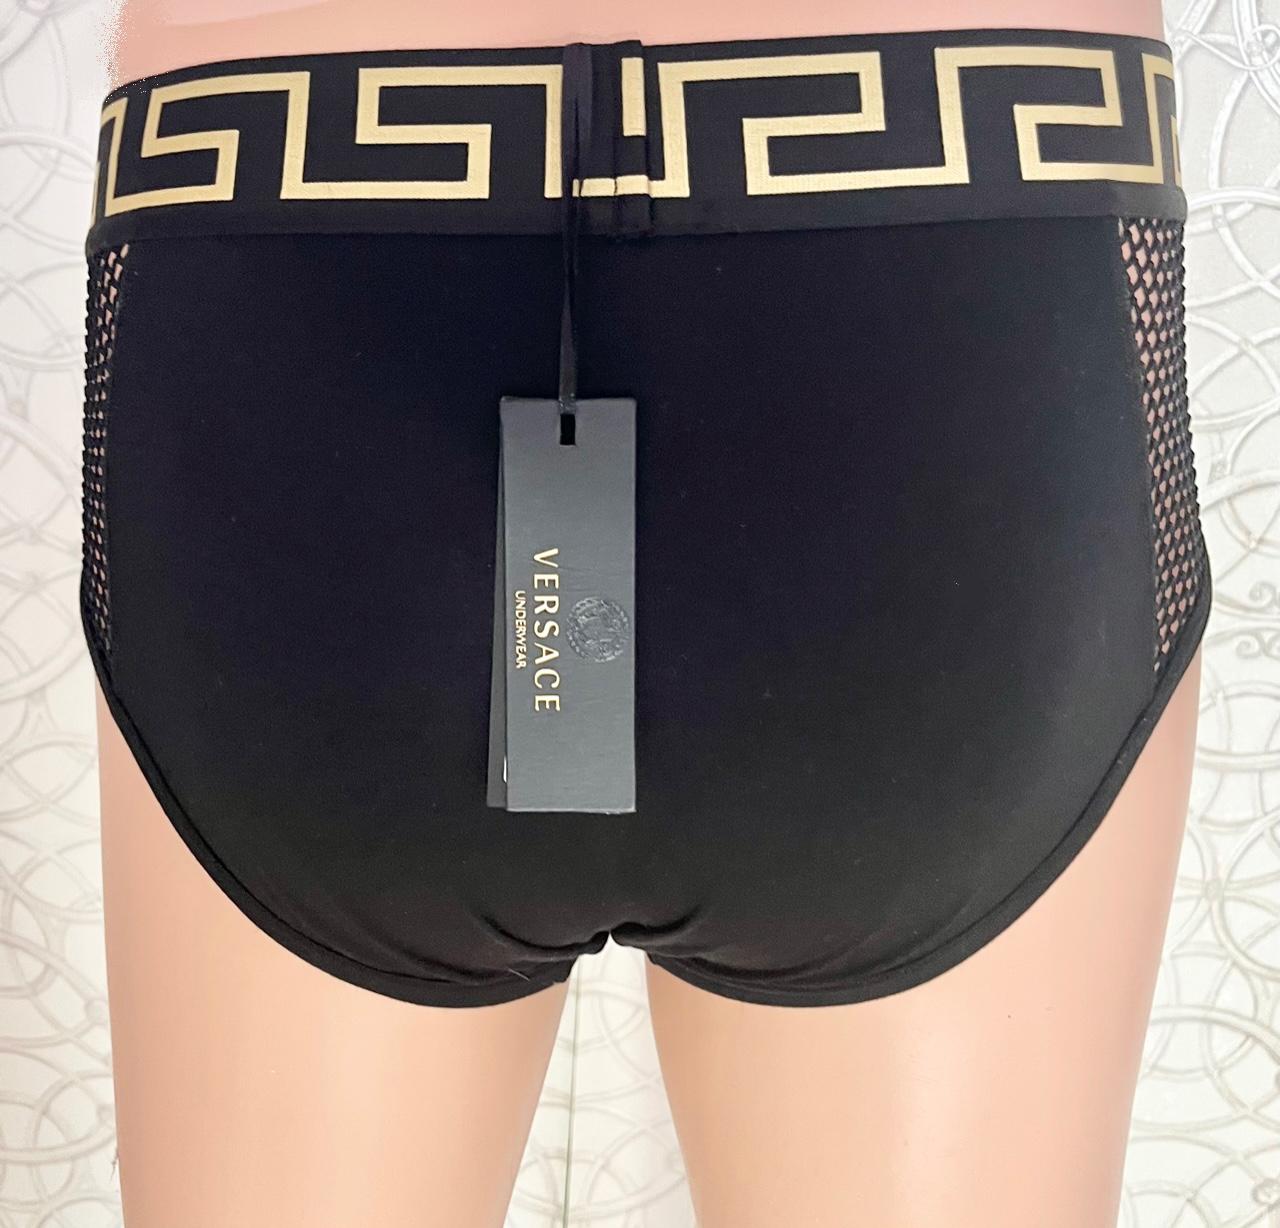 S/S 2013 Look # 3 VERSACE BLACK MESH and GREEK KEY MEDUSA TRUNKS Size 5 For Sale 3